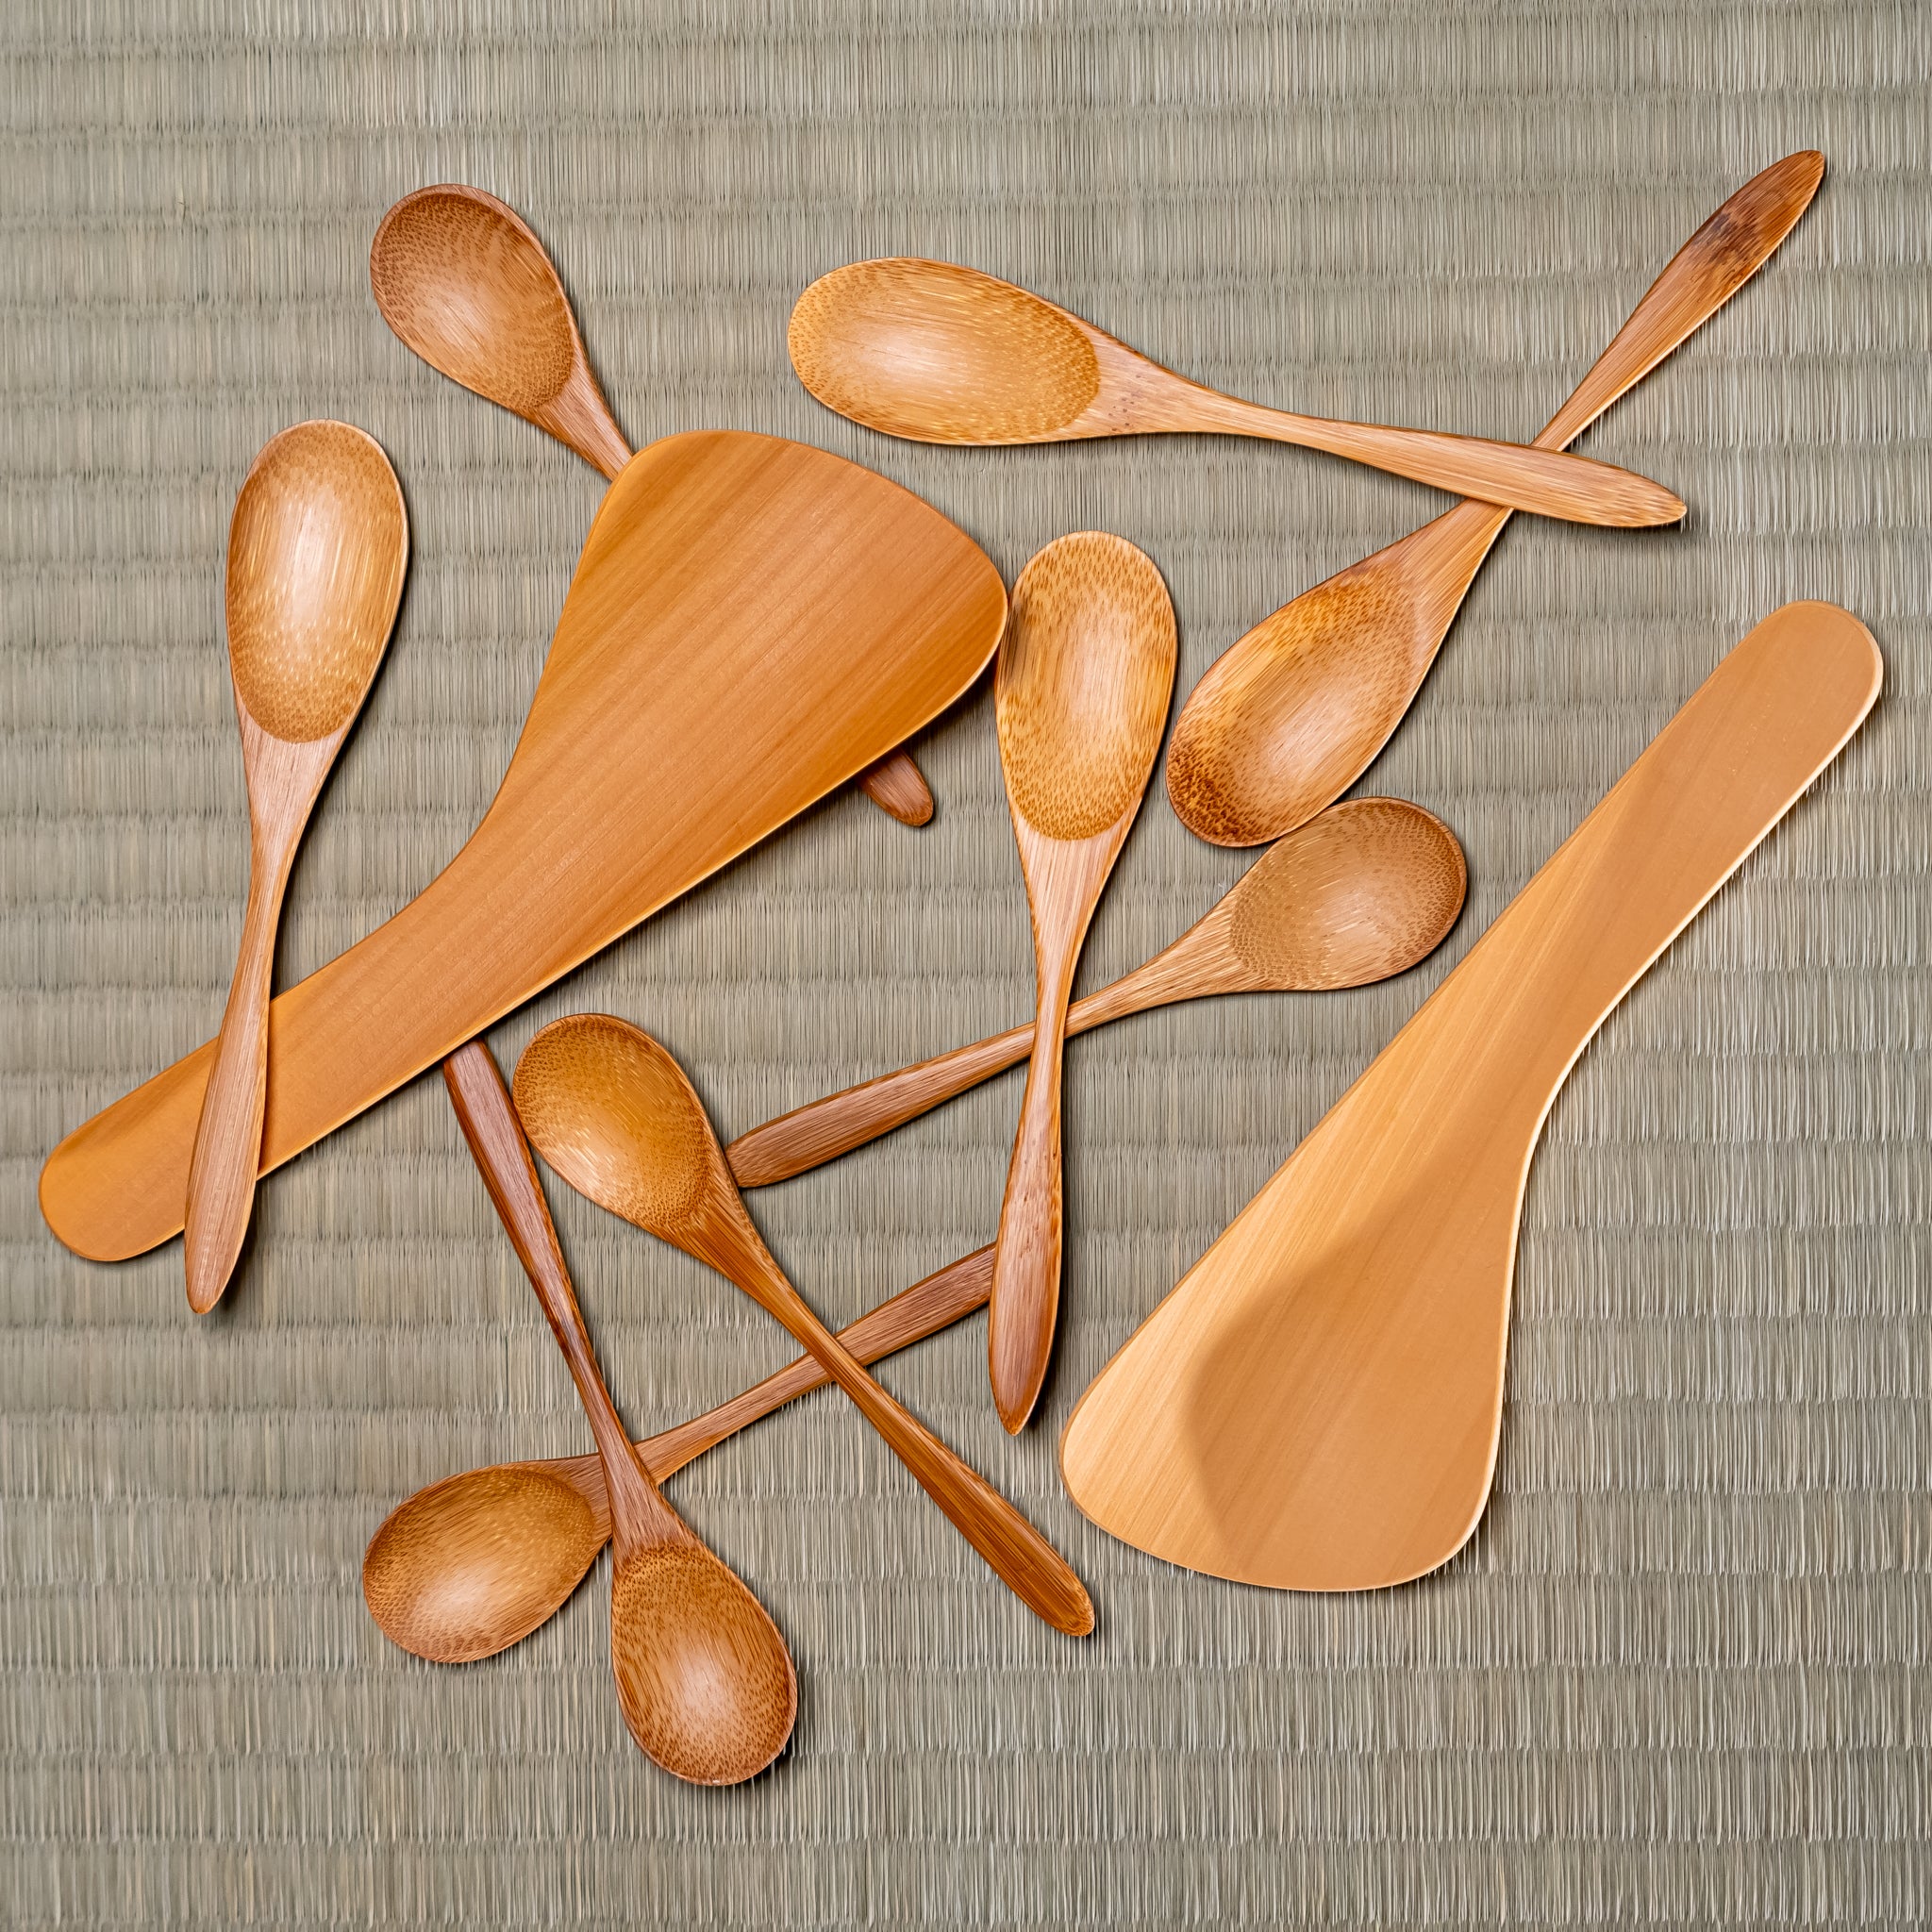 A pile of Japanese bamboo spoons and rice servers